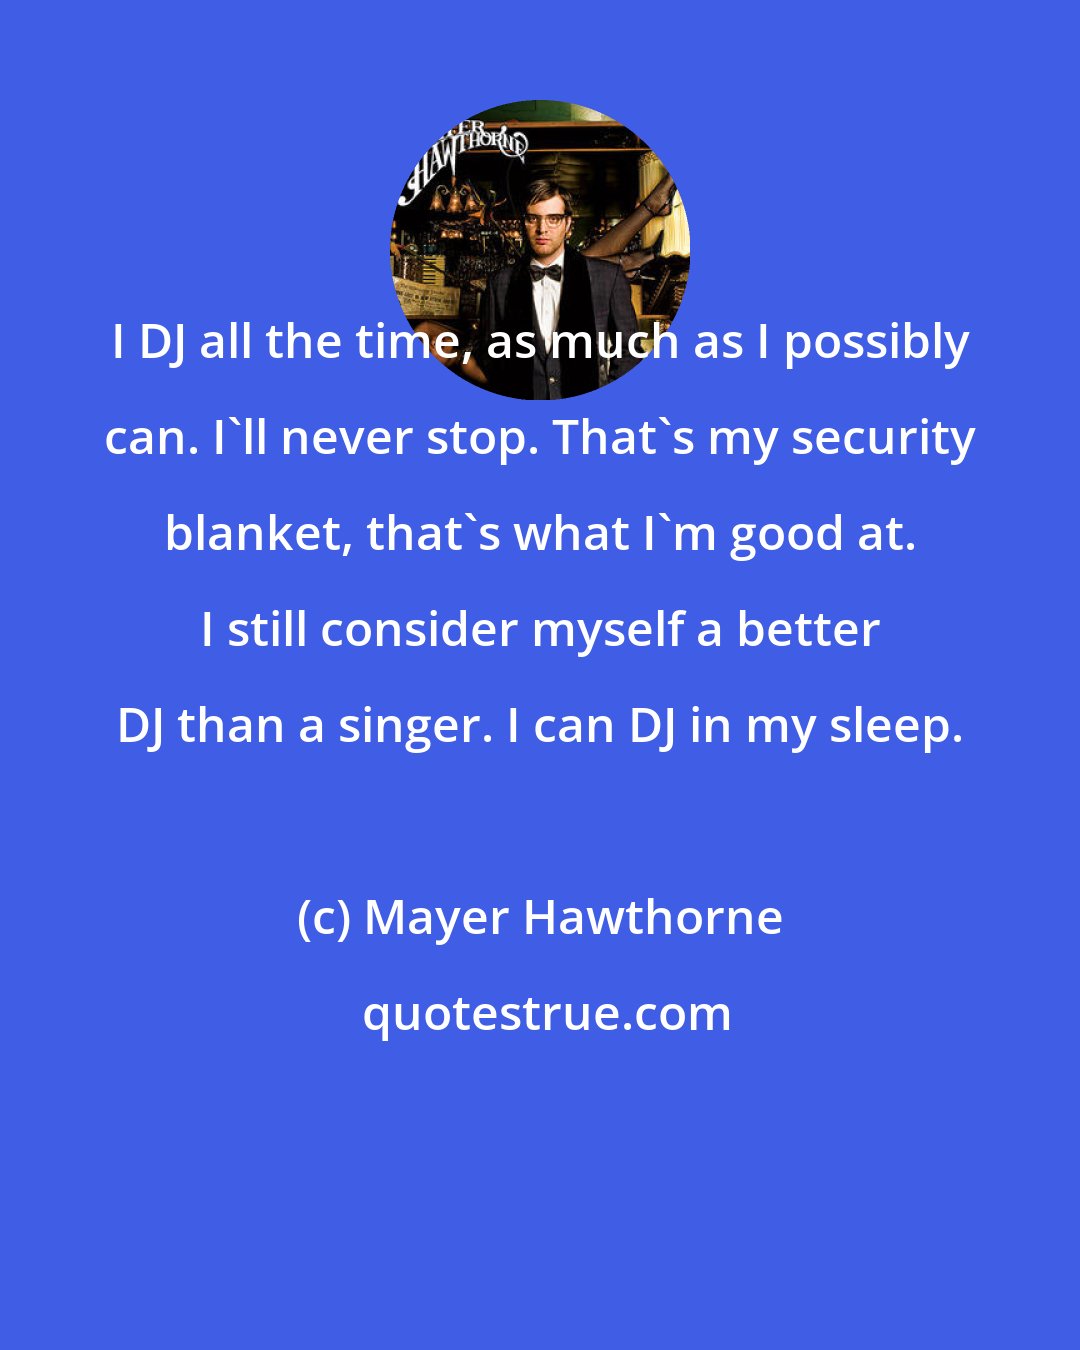 Mayer Hawthorne: I DJ all the time, as much as I possibly can. I'll never stop. That's my security blanket, that's what I'm good at. I still consider myself a better DJ than a singer. I can DJ in my sleep.